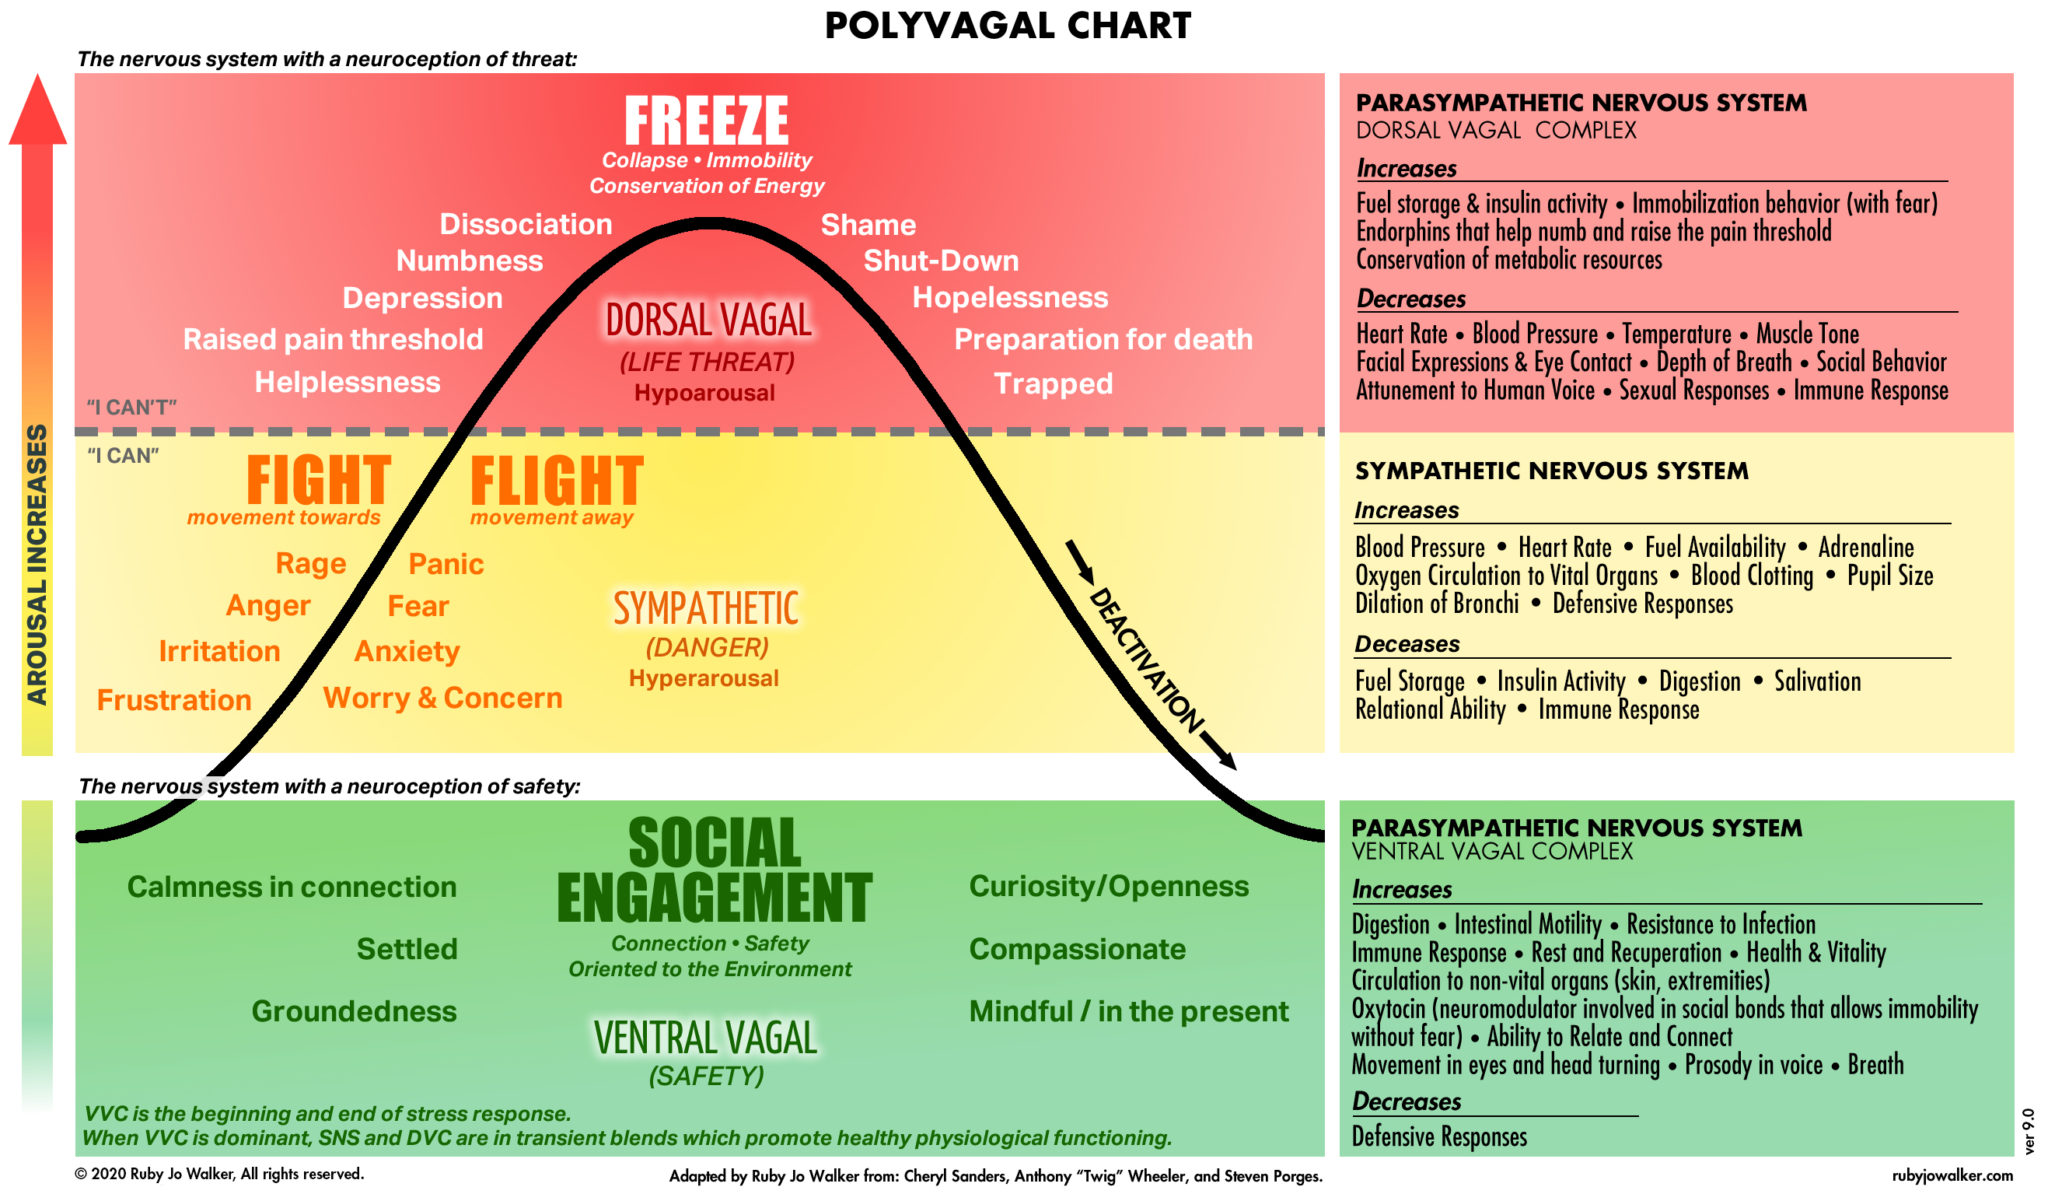 This is the Polyvagal Chart, developed by Dr. Stephen Porges in 1994